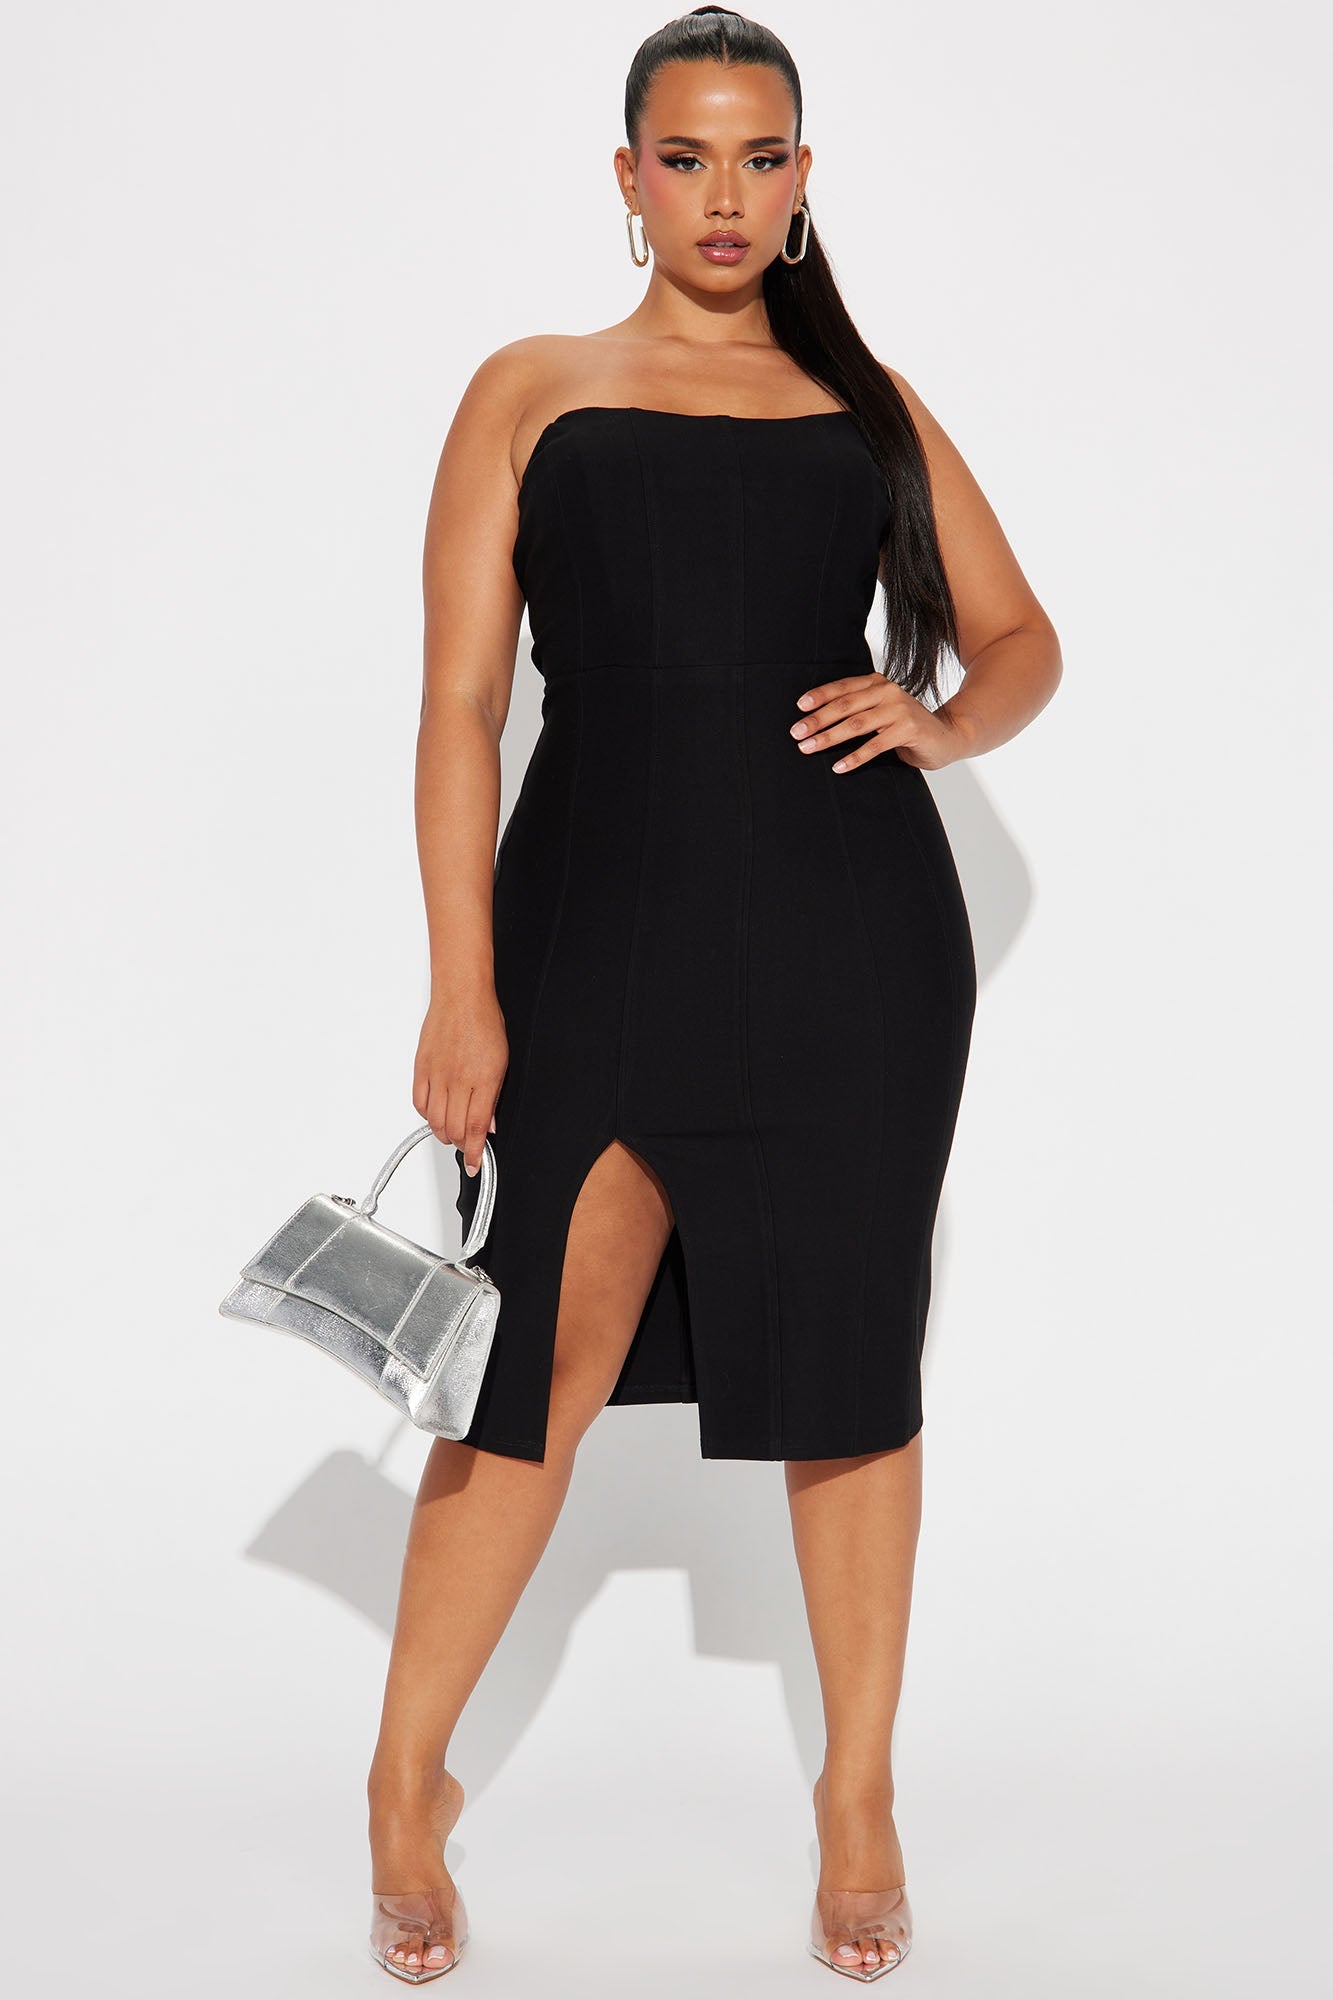 Sultry Sophistication: Islands Corset Midi Dress in Black